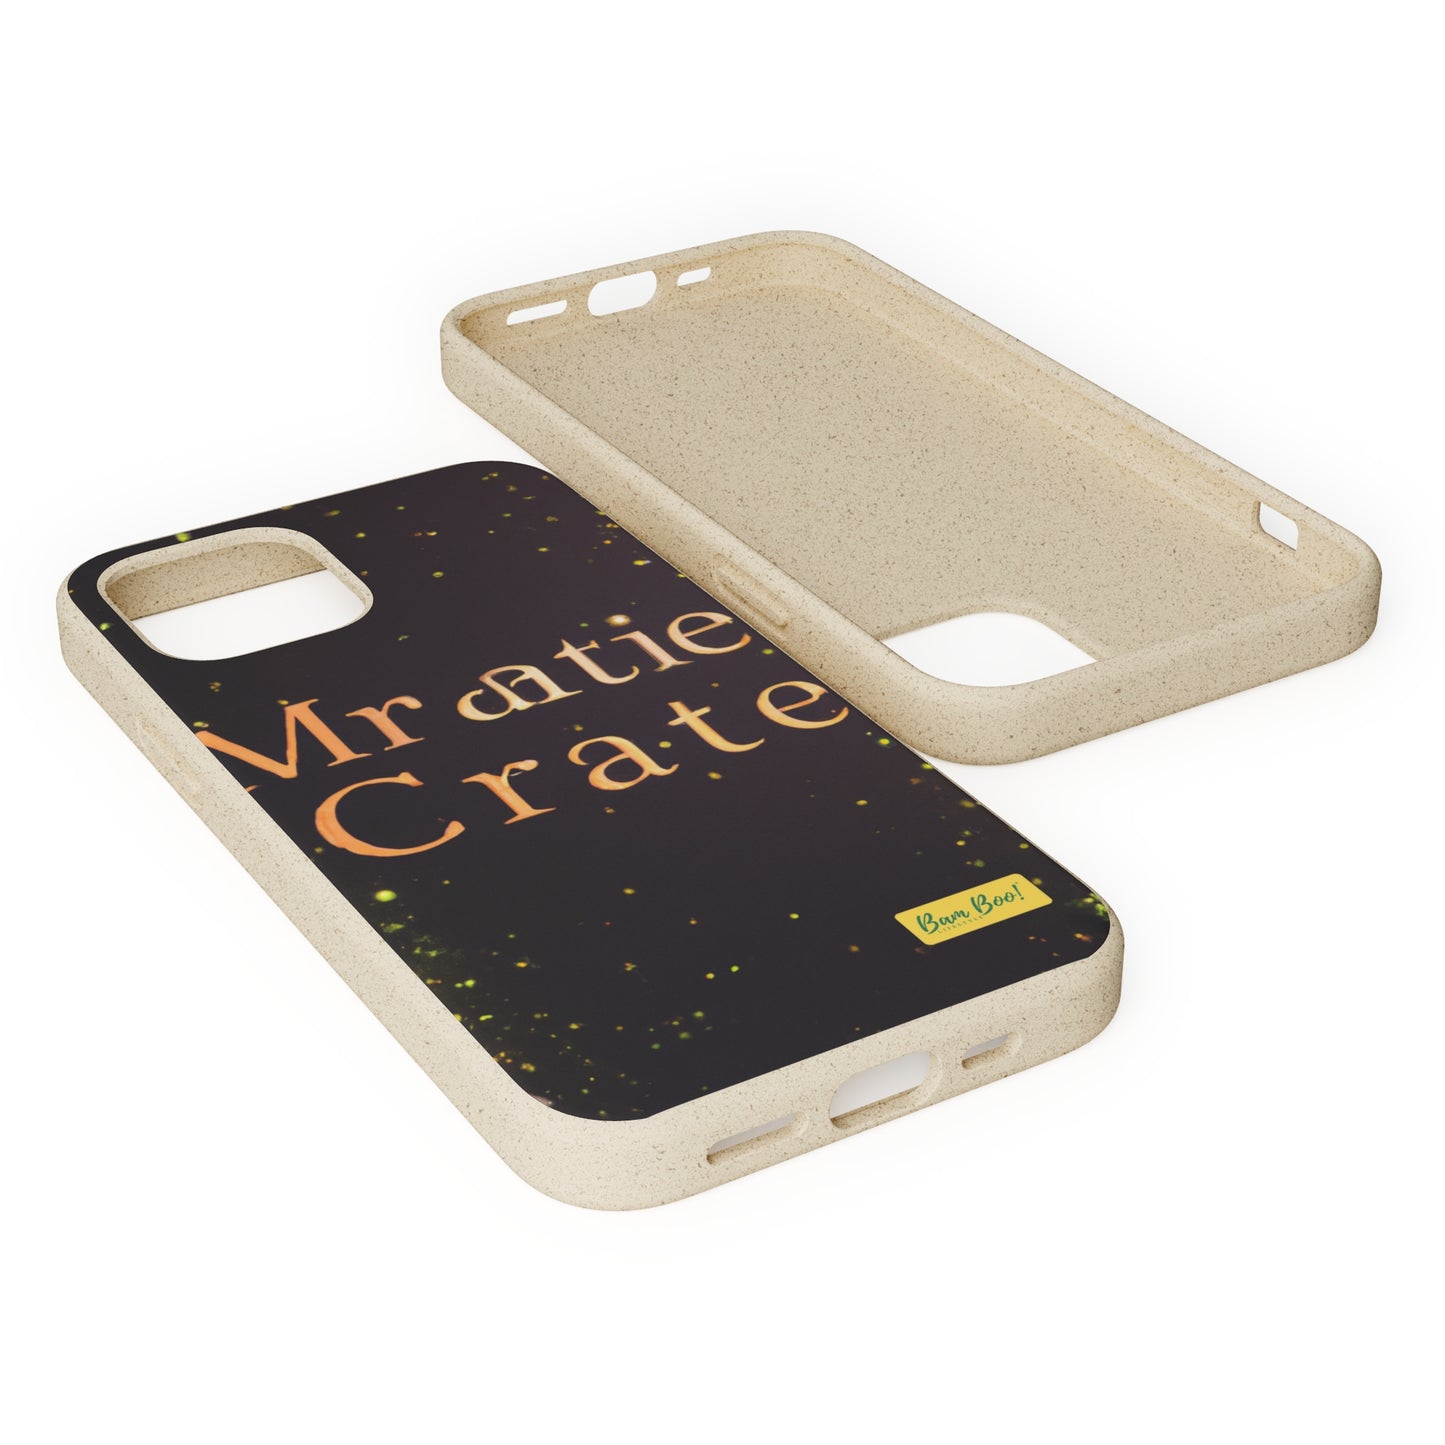 "Capturing Emotion: An Artistic Visual Storytelling Collage" - Bam Boo! Lifestyle Eco-friendly Cases